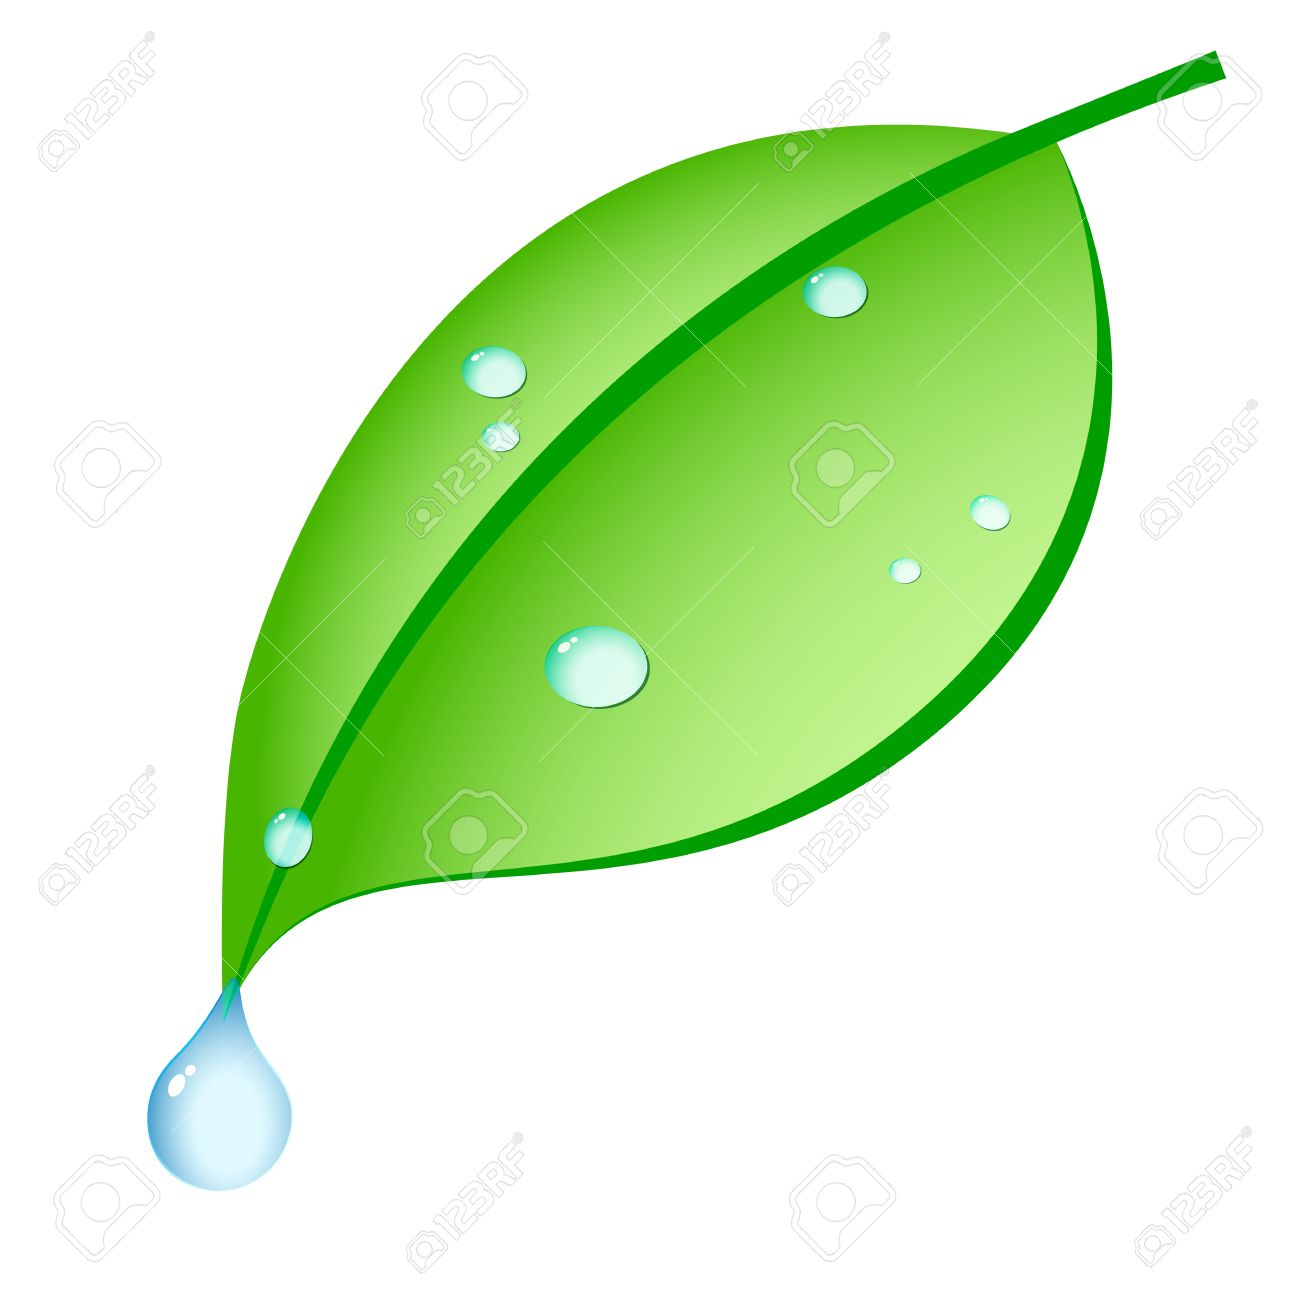 Green Leaf With Drops Of Dew On Royalty Free Cliparts, Vectors.